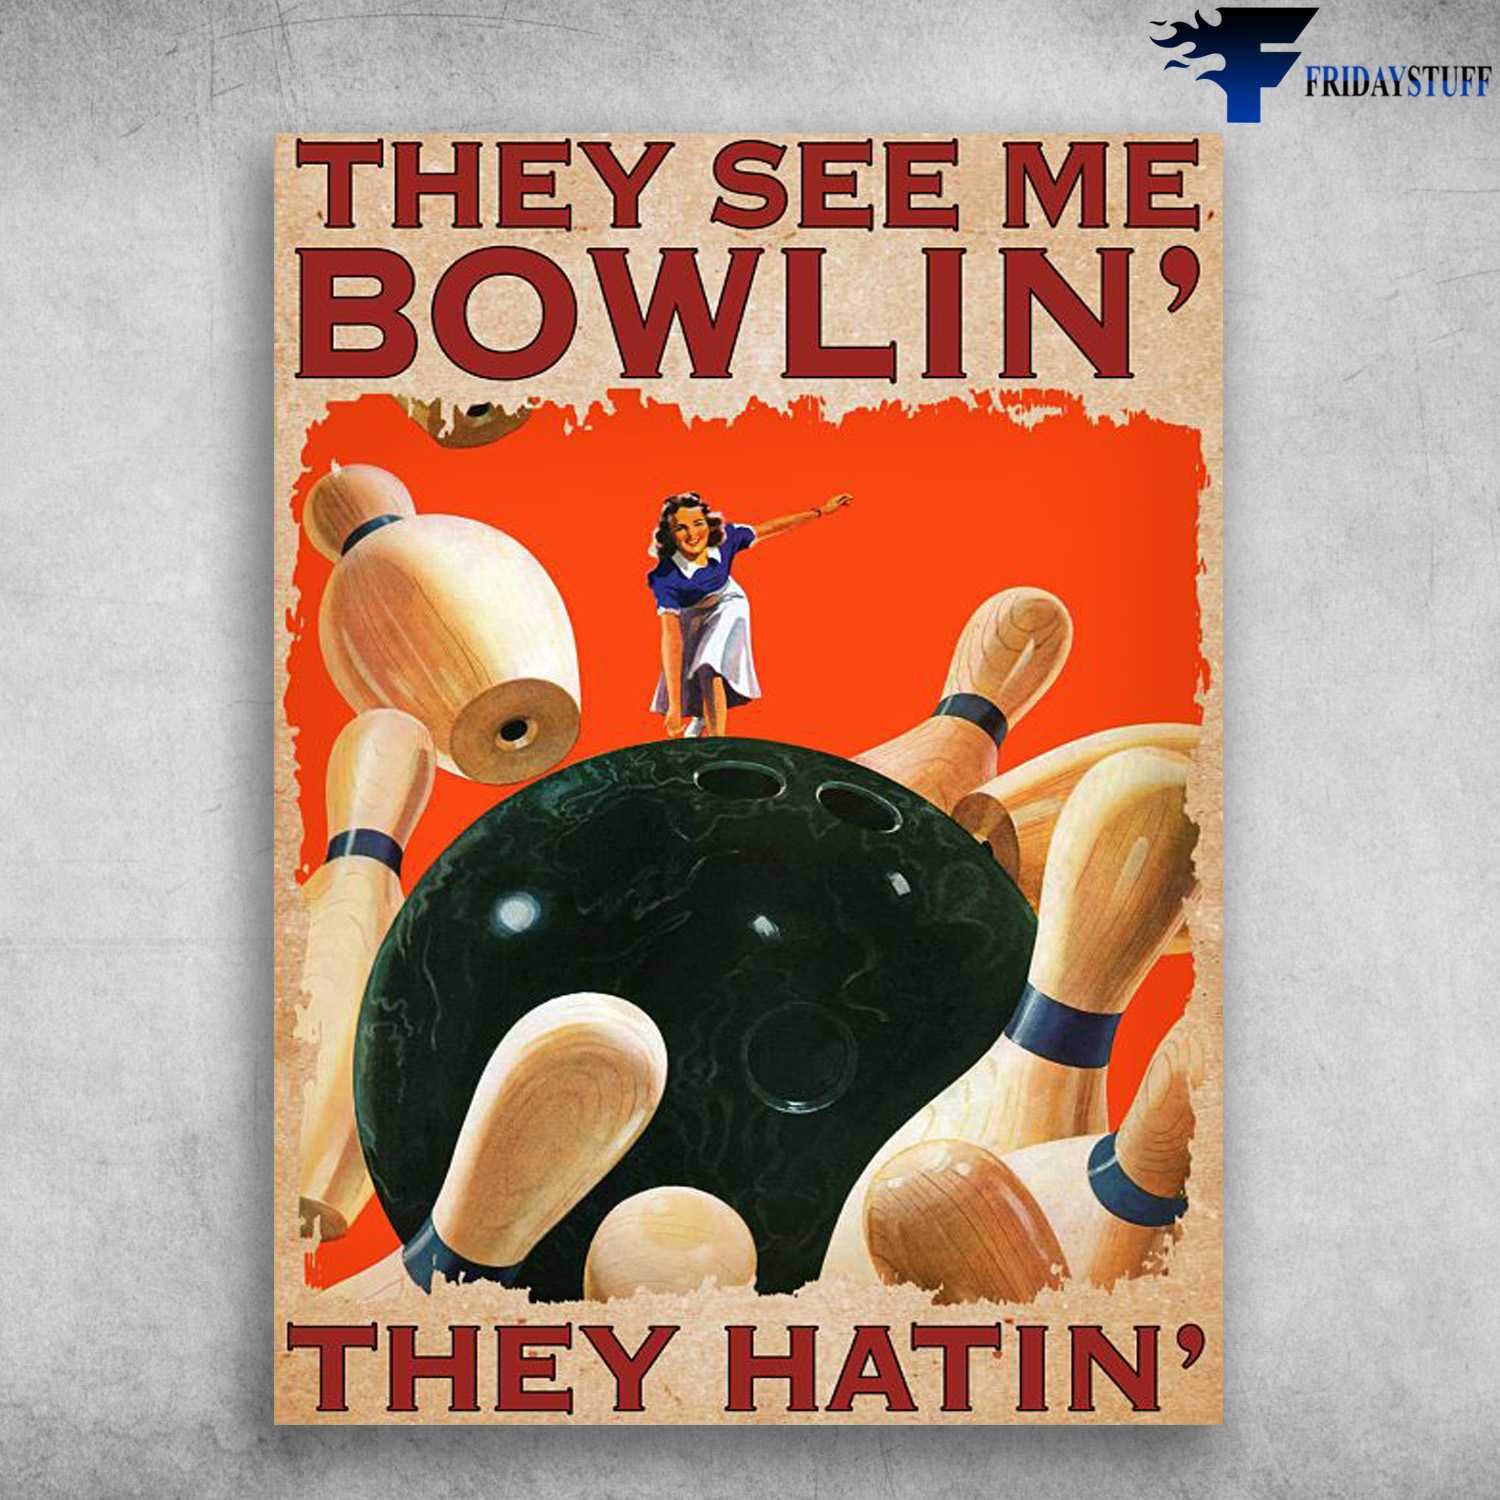 Bowling Girl, Bowling Poster, The See Me Bowlin', They Hatin'